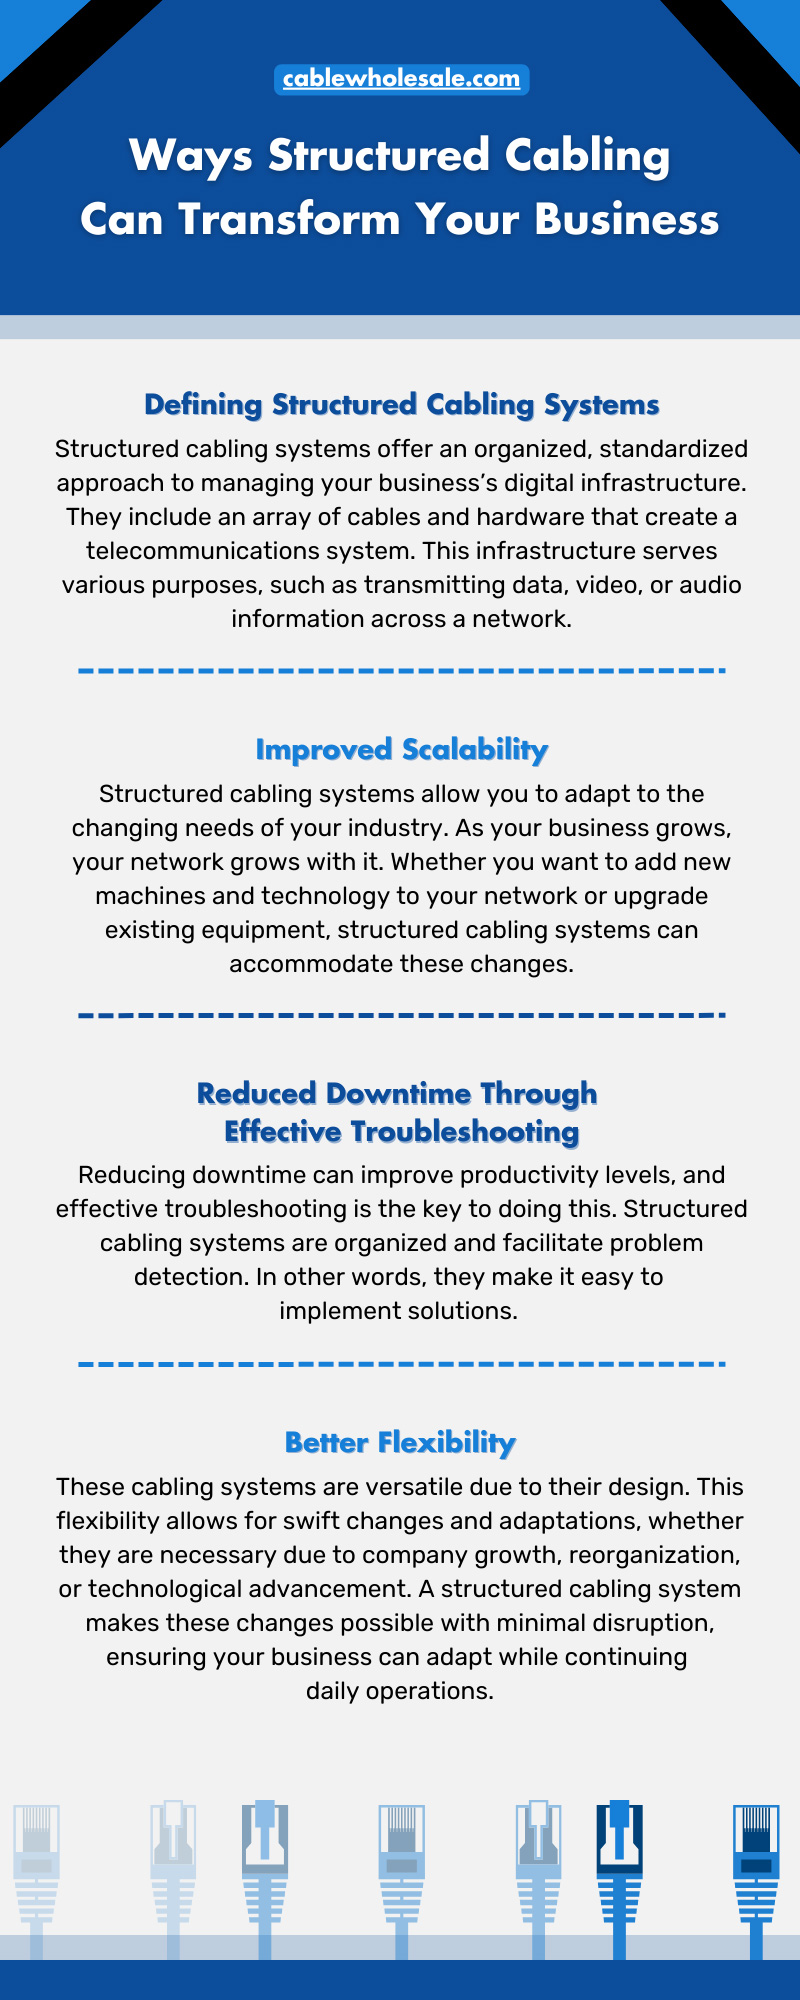 8 Ways Structured Cabling Can Transform Your Business